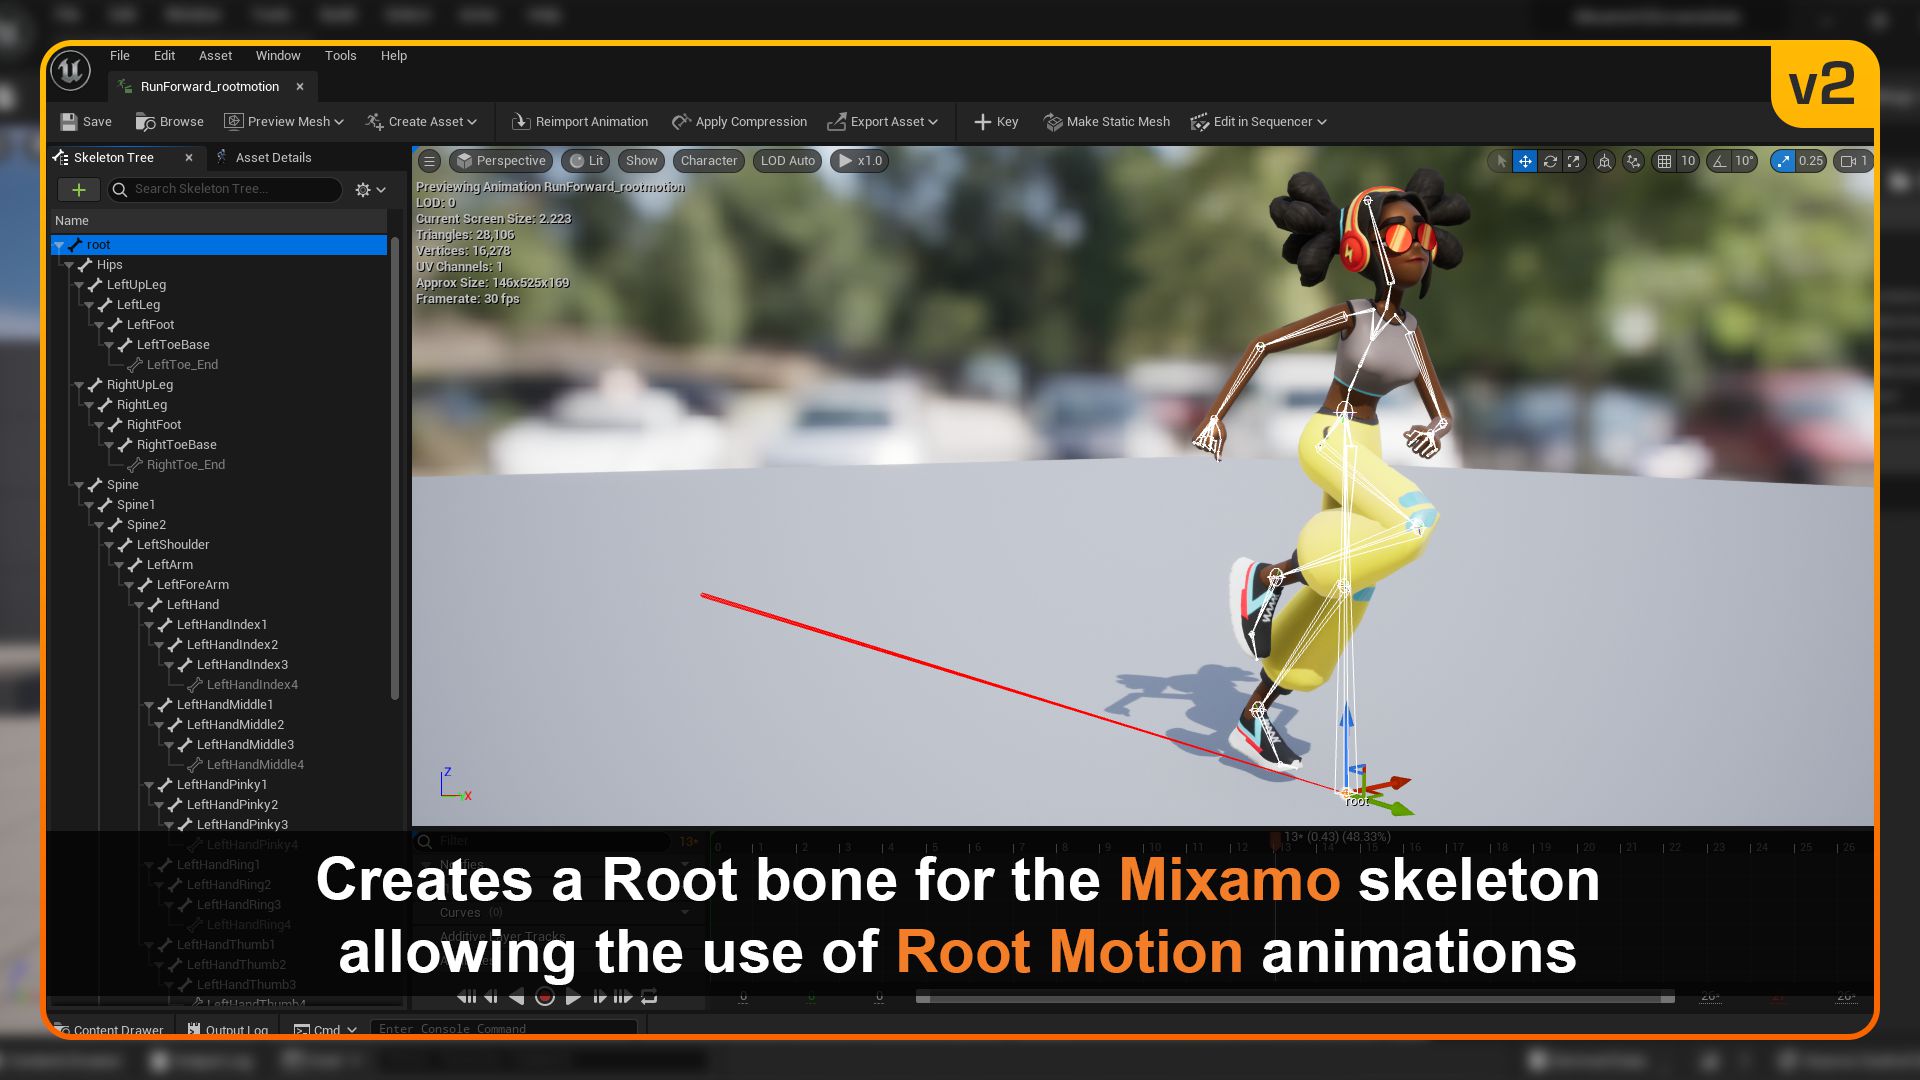 Creates a Root bone for the Mixamo skeleton allowing the use of Root Motion animations